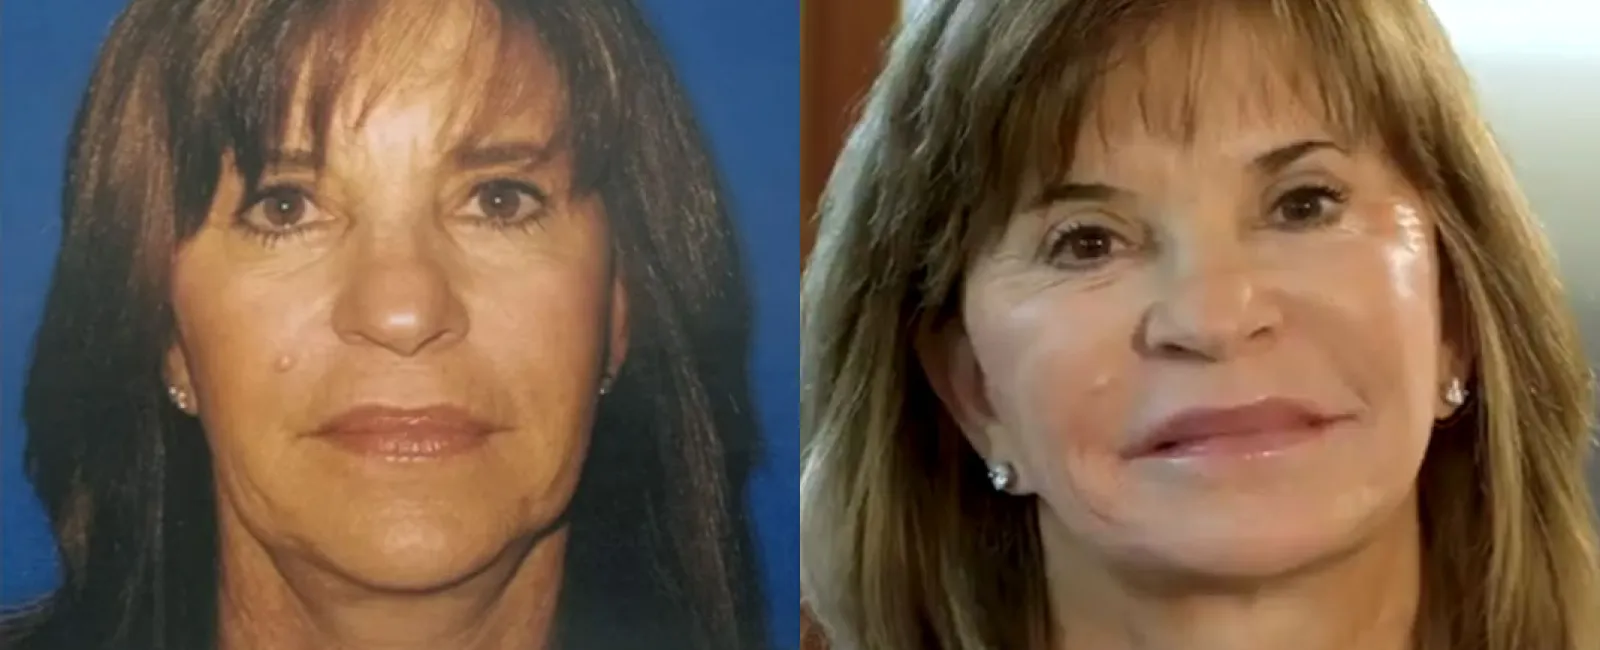 Facelift Video Case Study – Real People, Real Results